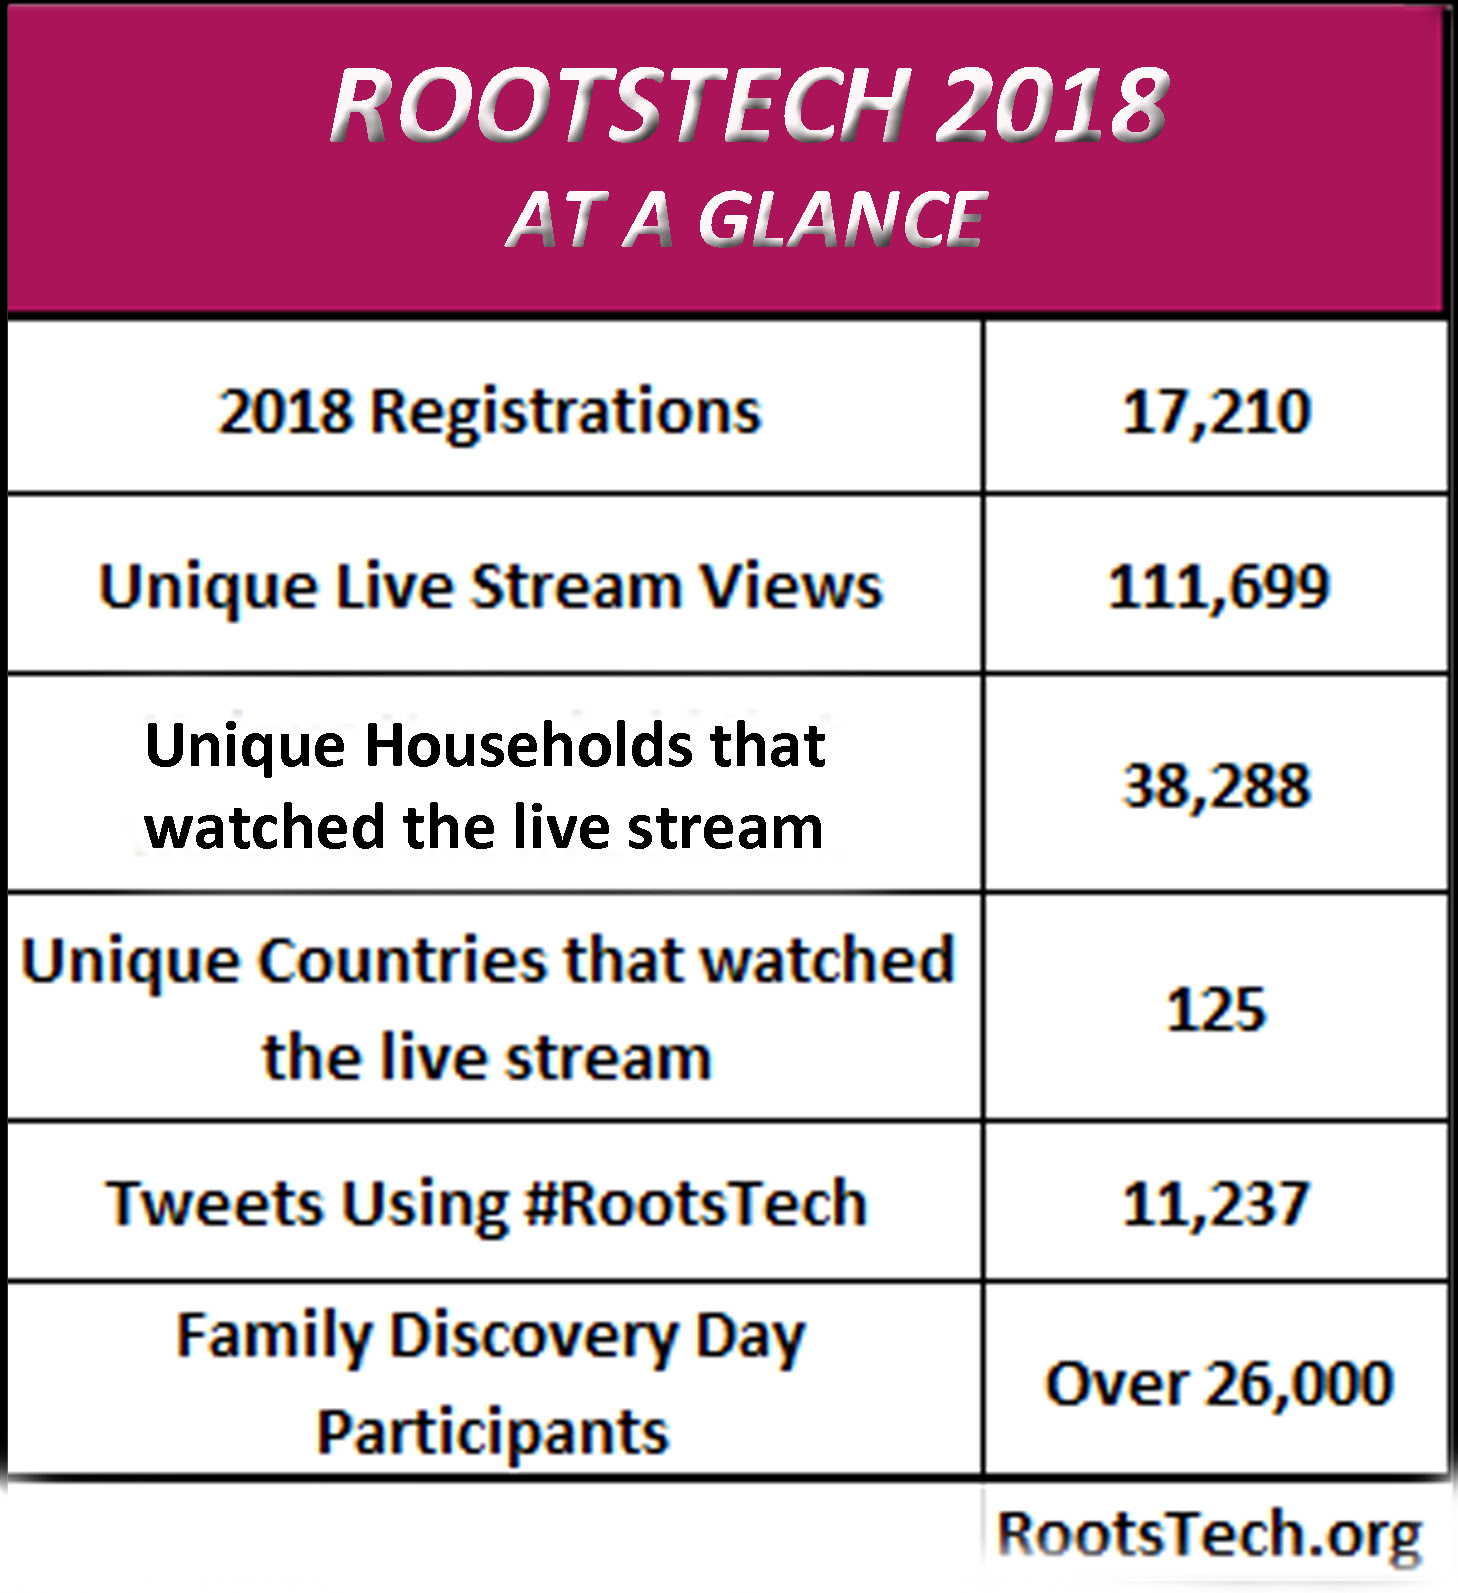 rootstech_2018_at_a_glance.jpg